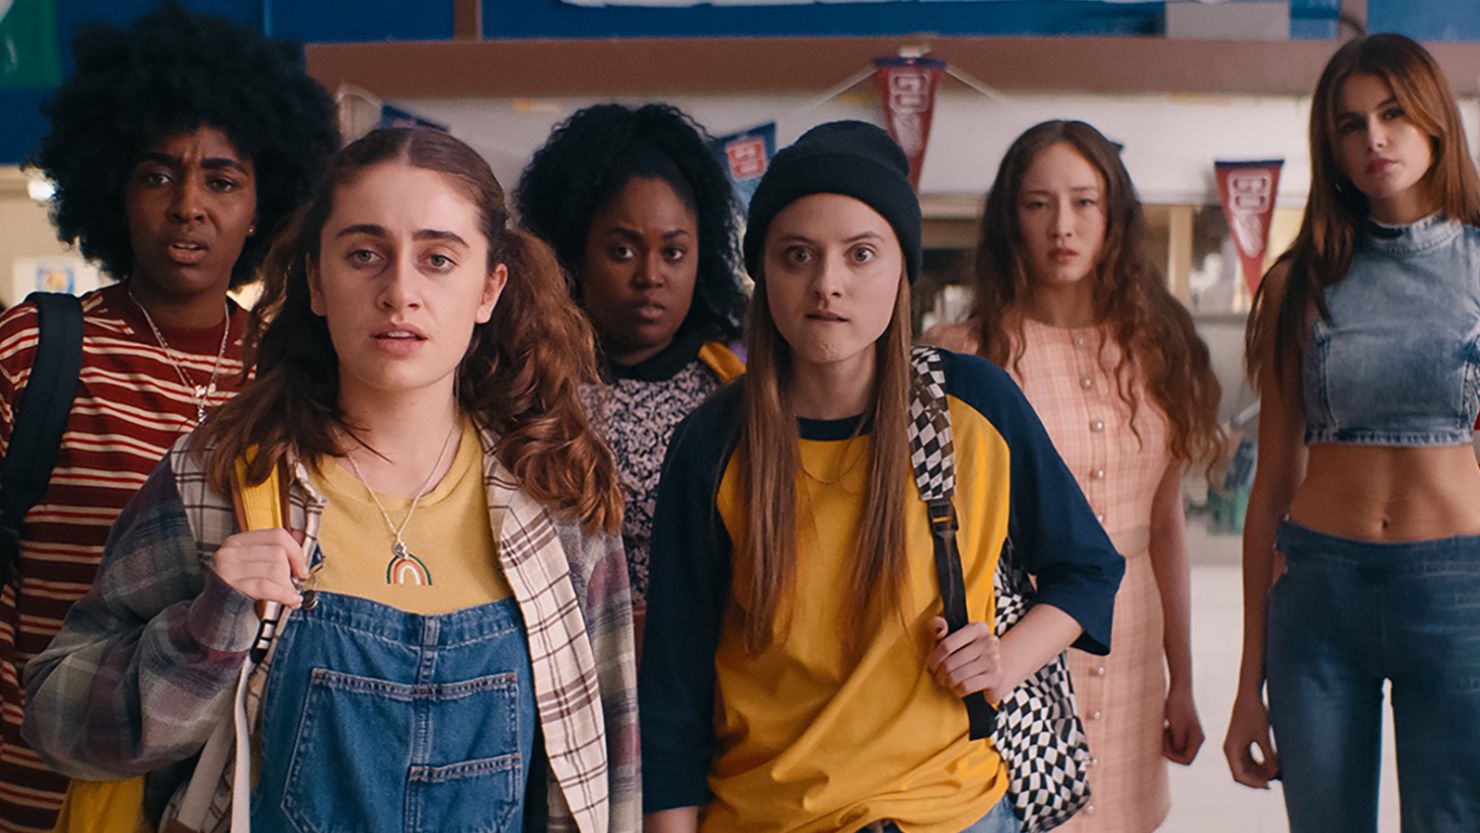 Bottoms Director Emma Seligman on the High School Movies That Inspired Her